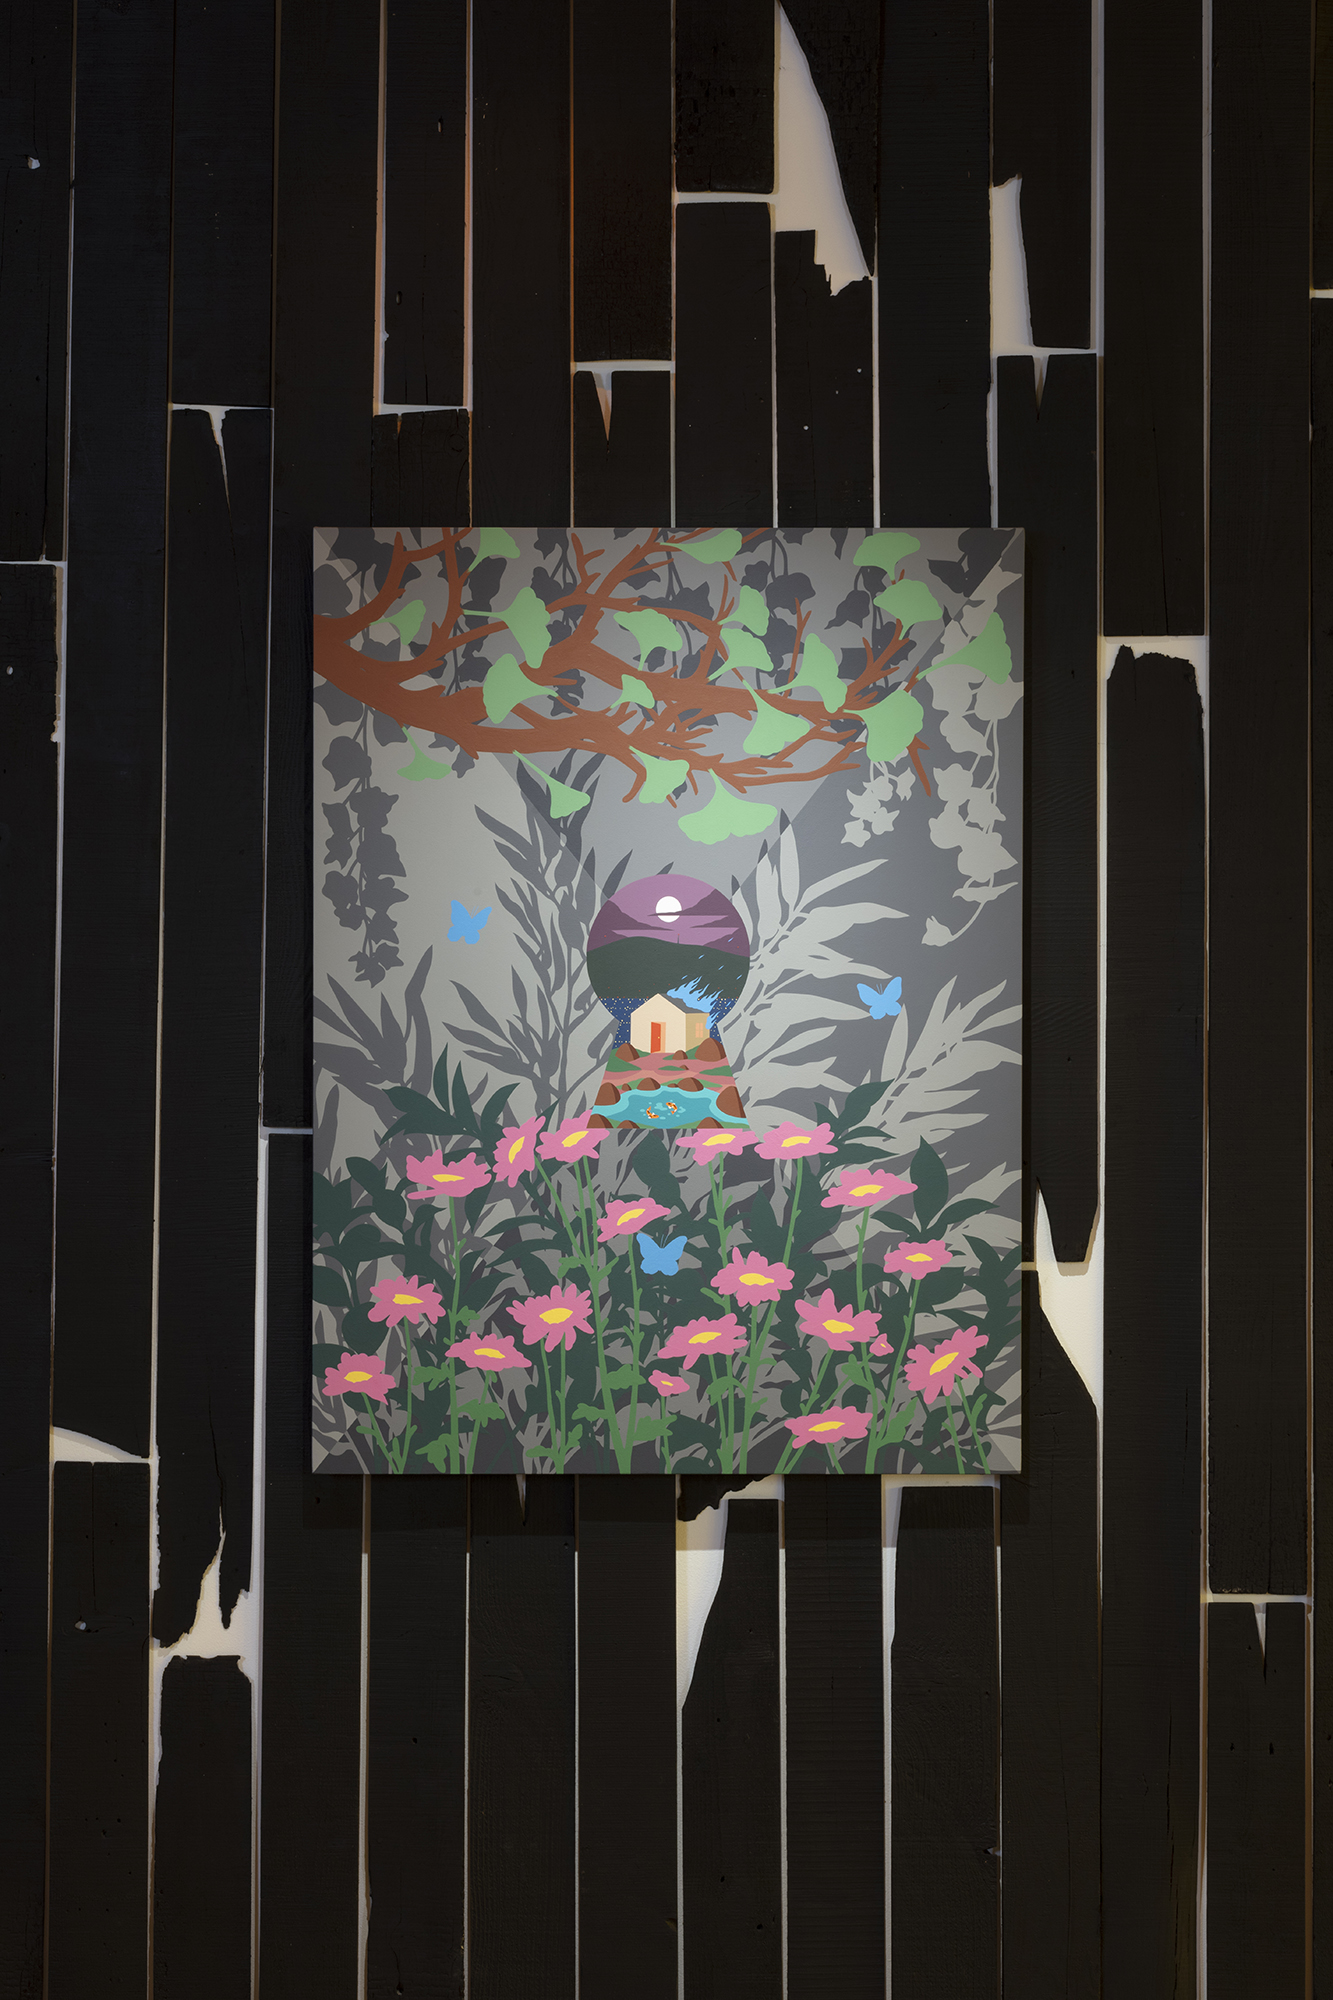 Against a black backdrop of burnt wood hangs Greg Ito's painting of pink flowers and disney-esque landscape